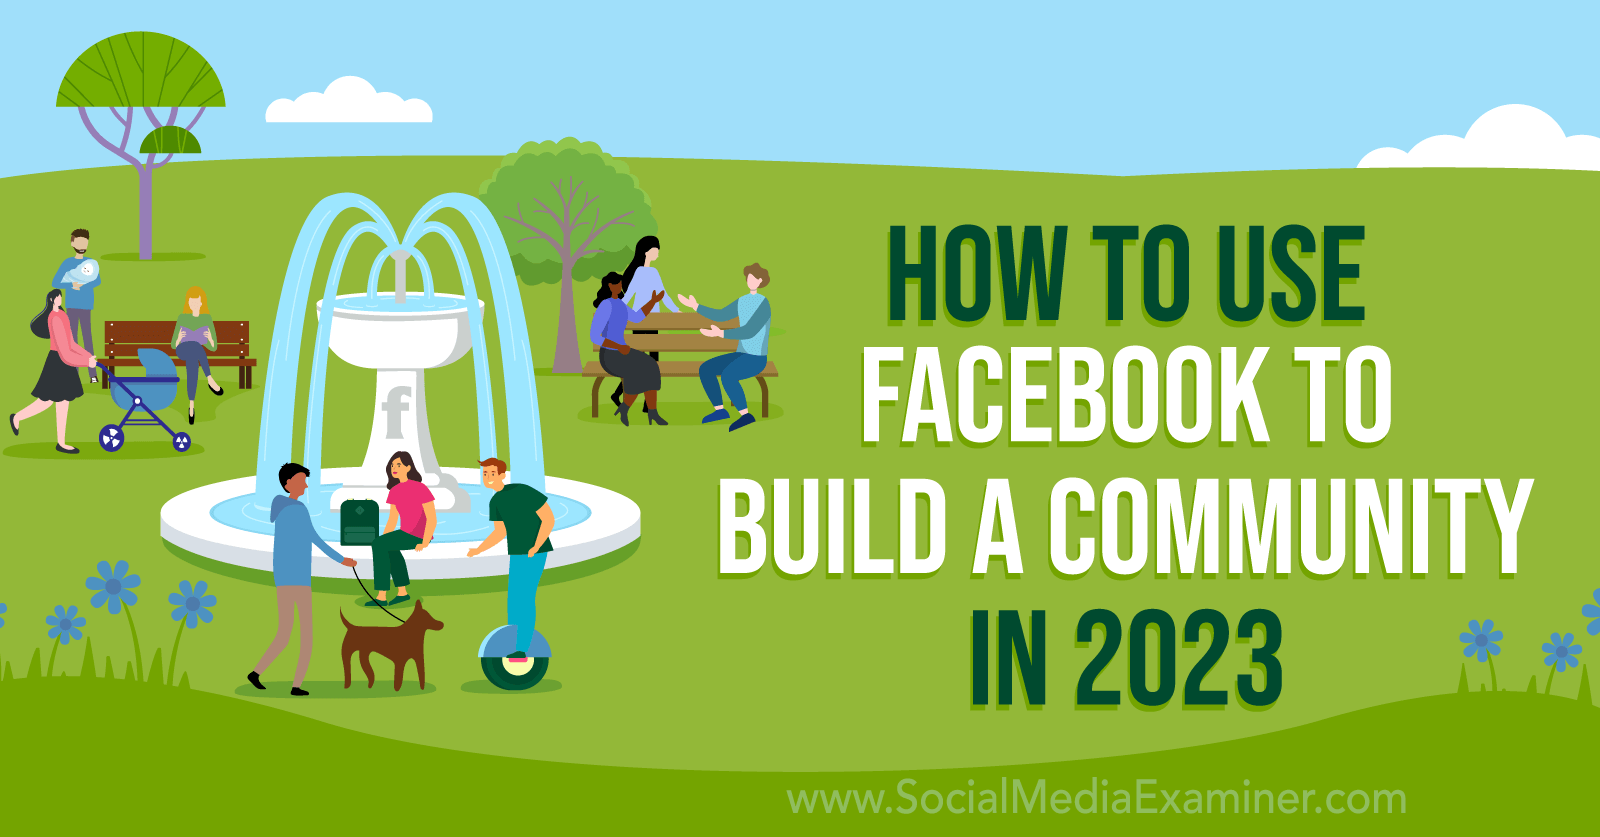 How to Use Facebook to Build a Community in 2023-Social Media Examiner